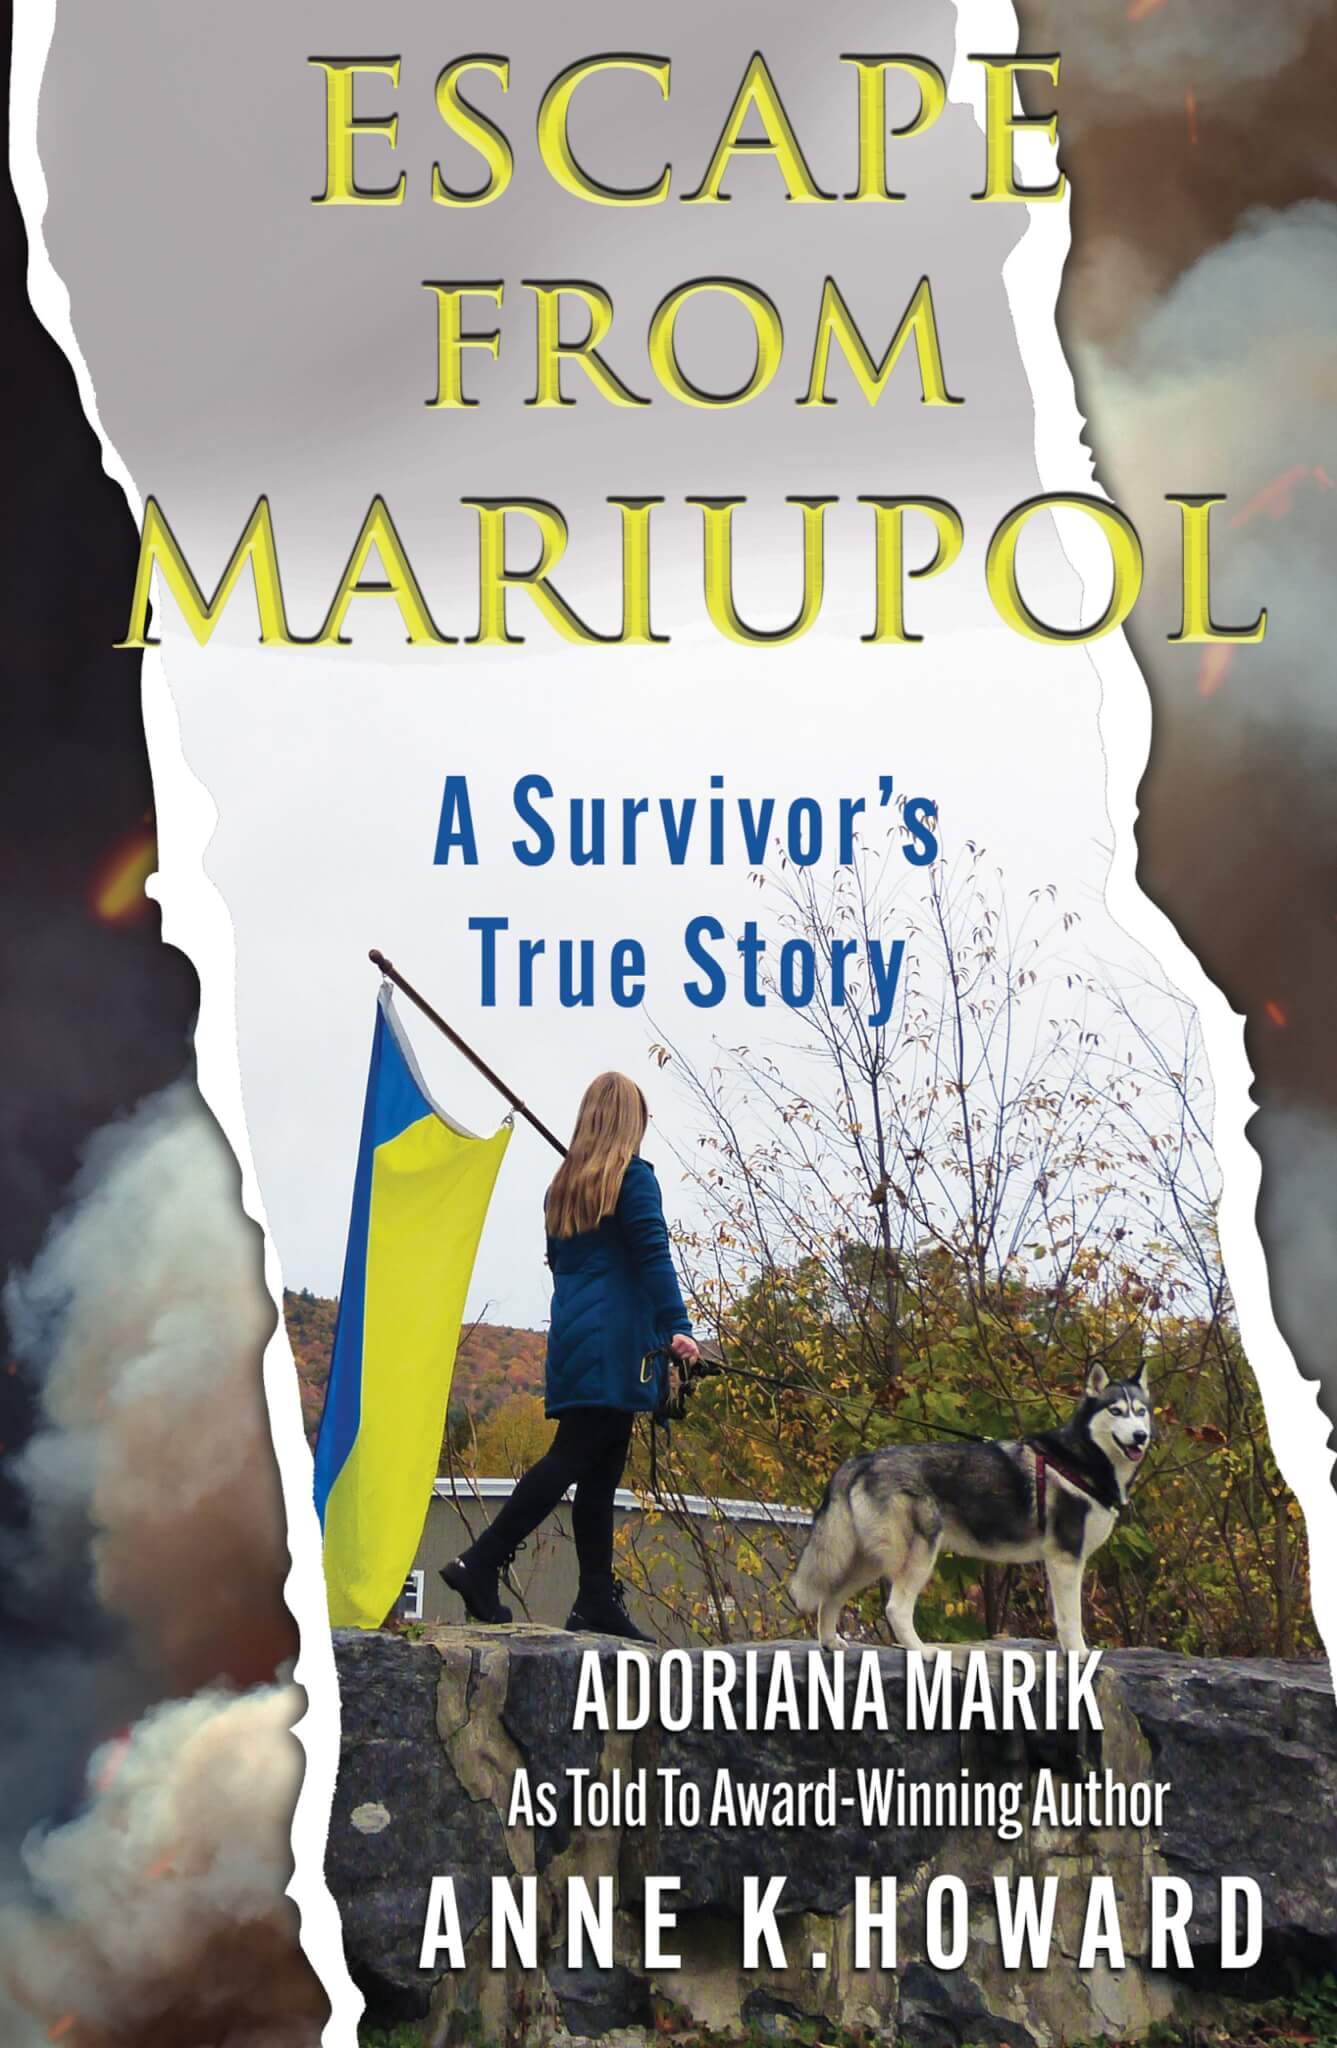 Escape from Mariupol: A Survivor's True Story eBooks Available